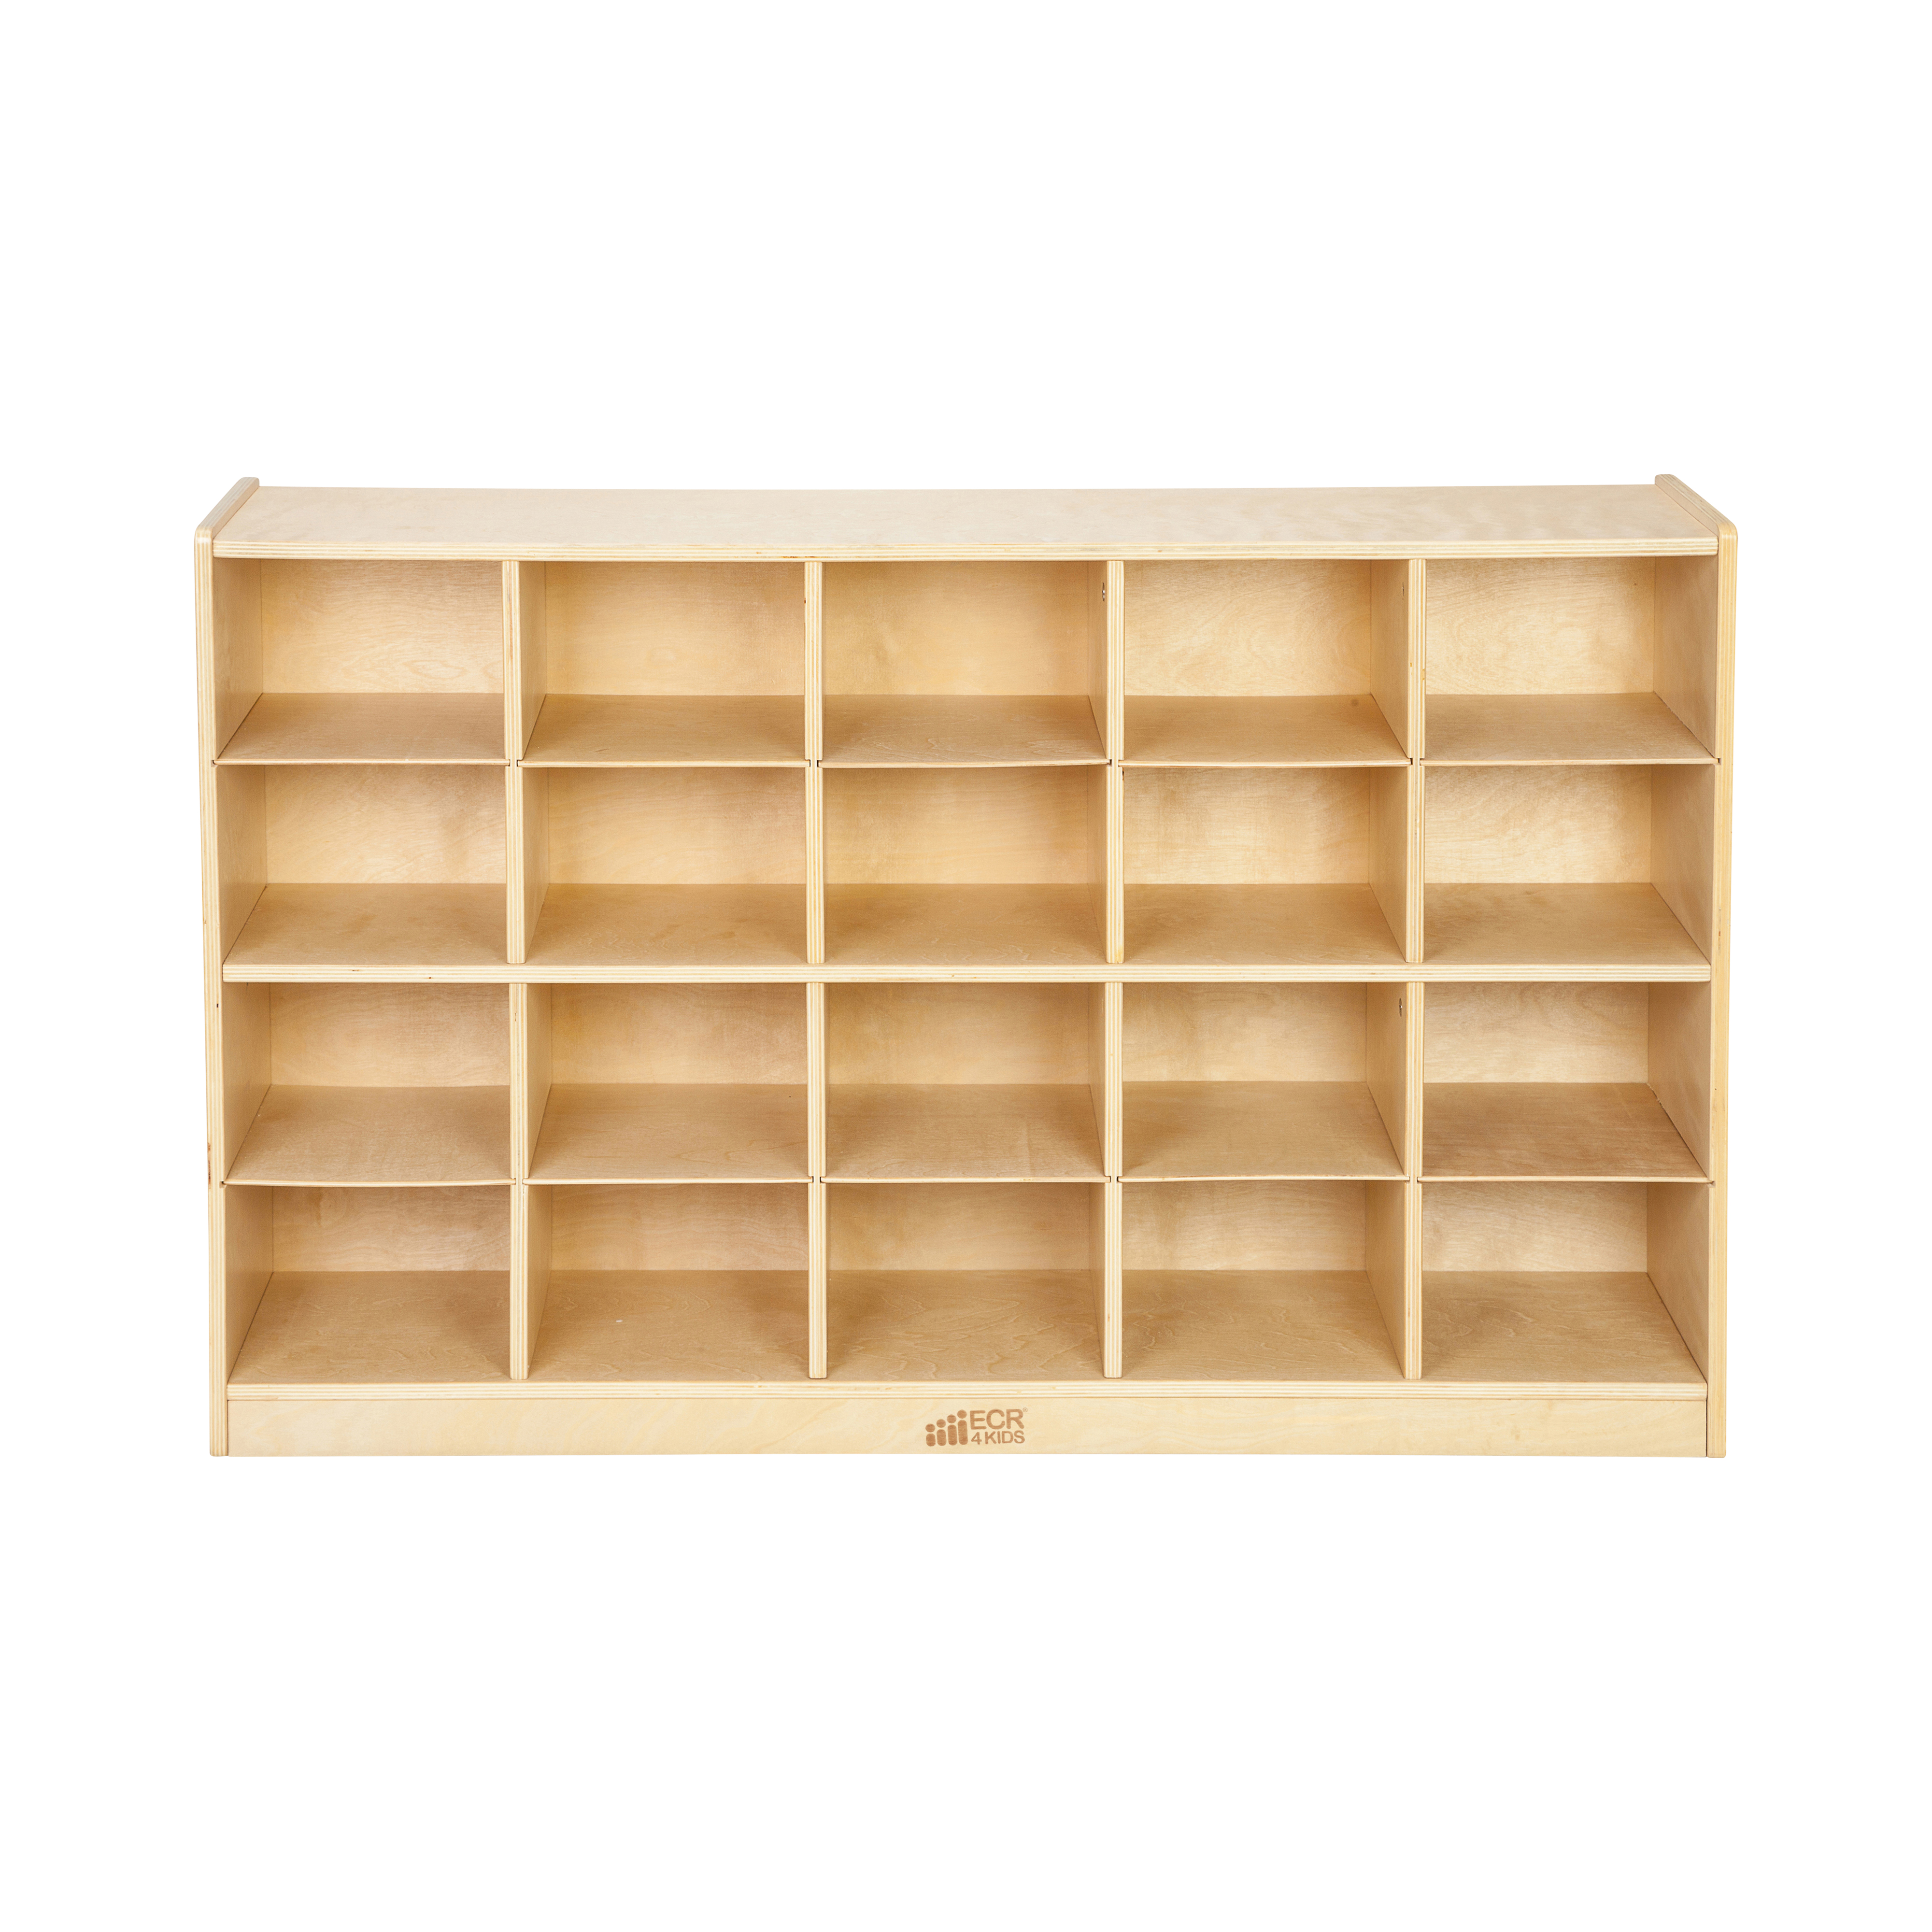 ECR4Kids 20 Cubby Mobile Tray Storage Cabinet, 4x5, Classroom Furniture, Natural - image 3 of 11